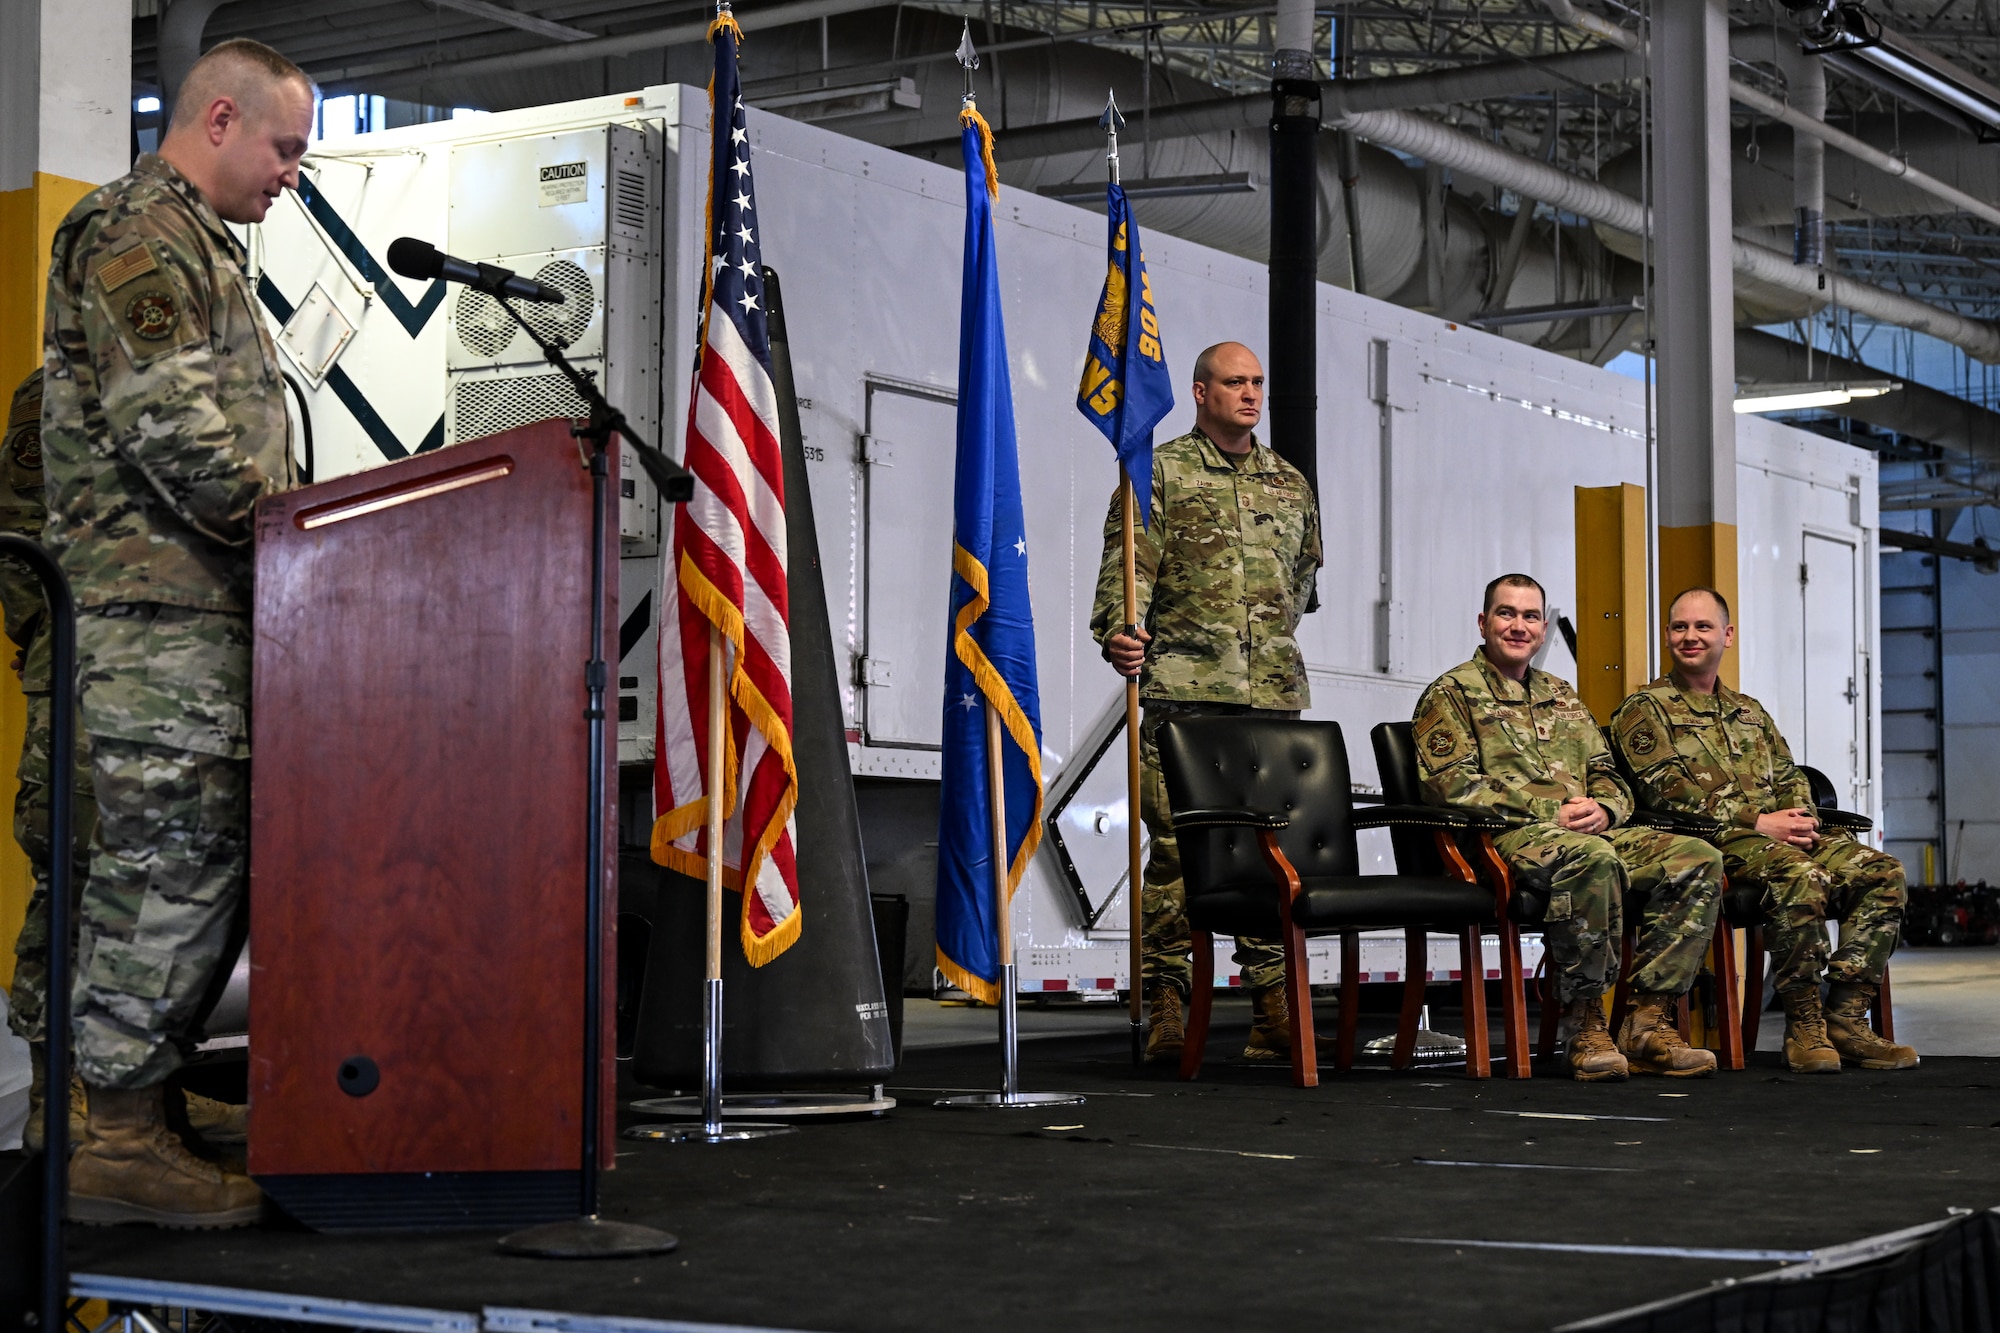 Col. Michael Power, 90th Maintenance Group commander, gives remarks during the 90th Munitions Squadron Change of Command Ceremony on F.E. Warren Air Force Base, Wyoming, May 30, 2023. A change of command represents a formal transfer of authority and responsibility from the outgoing commander to the incoming commander. (U.S. Air Force photo by Joseph Coslett Jr.)